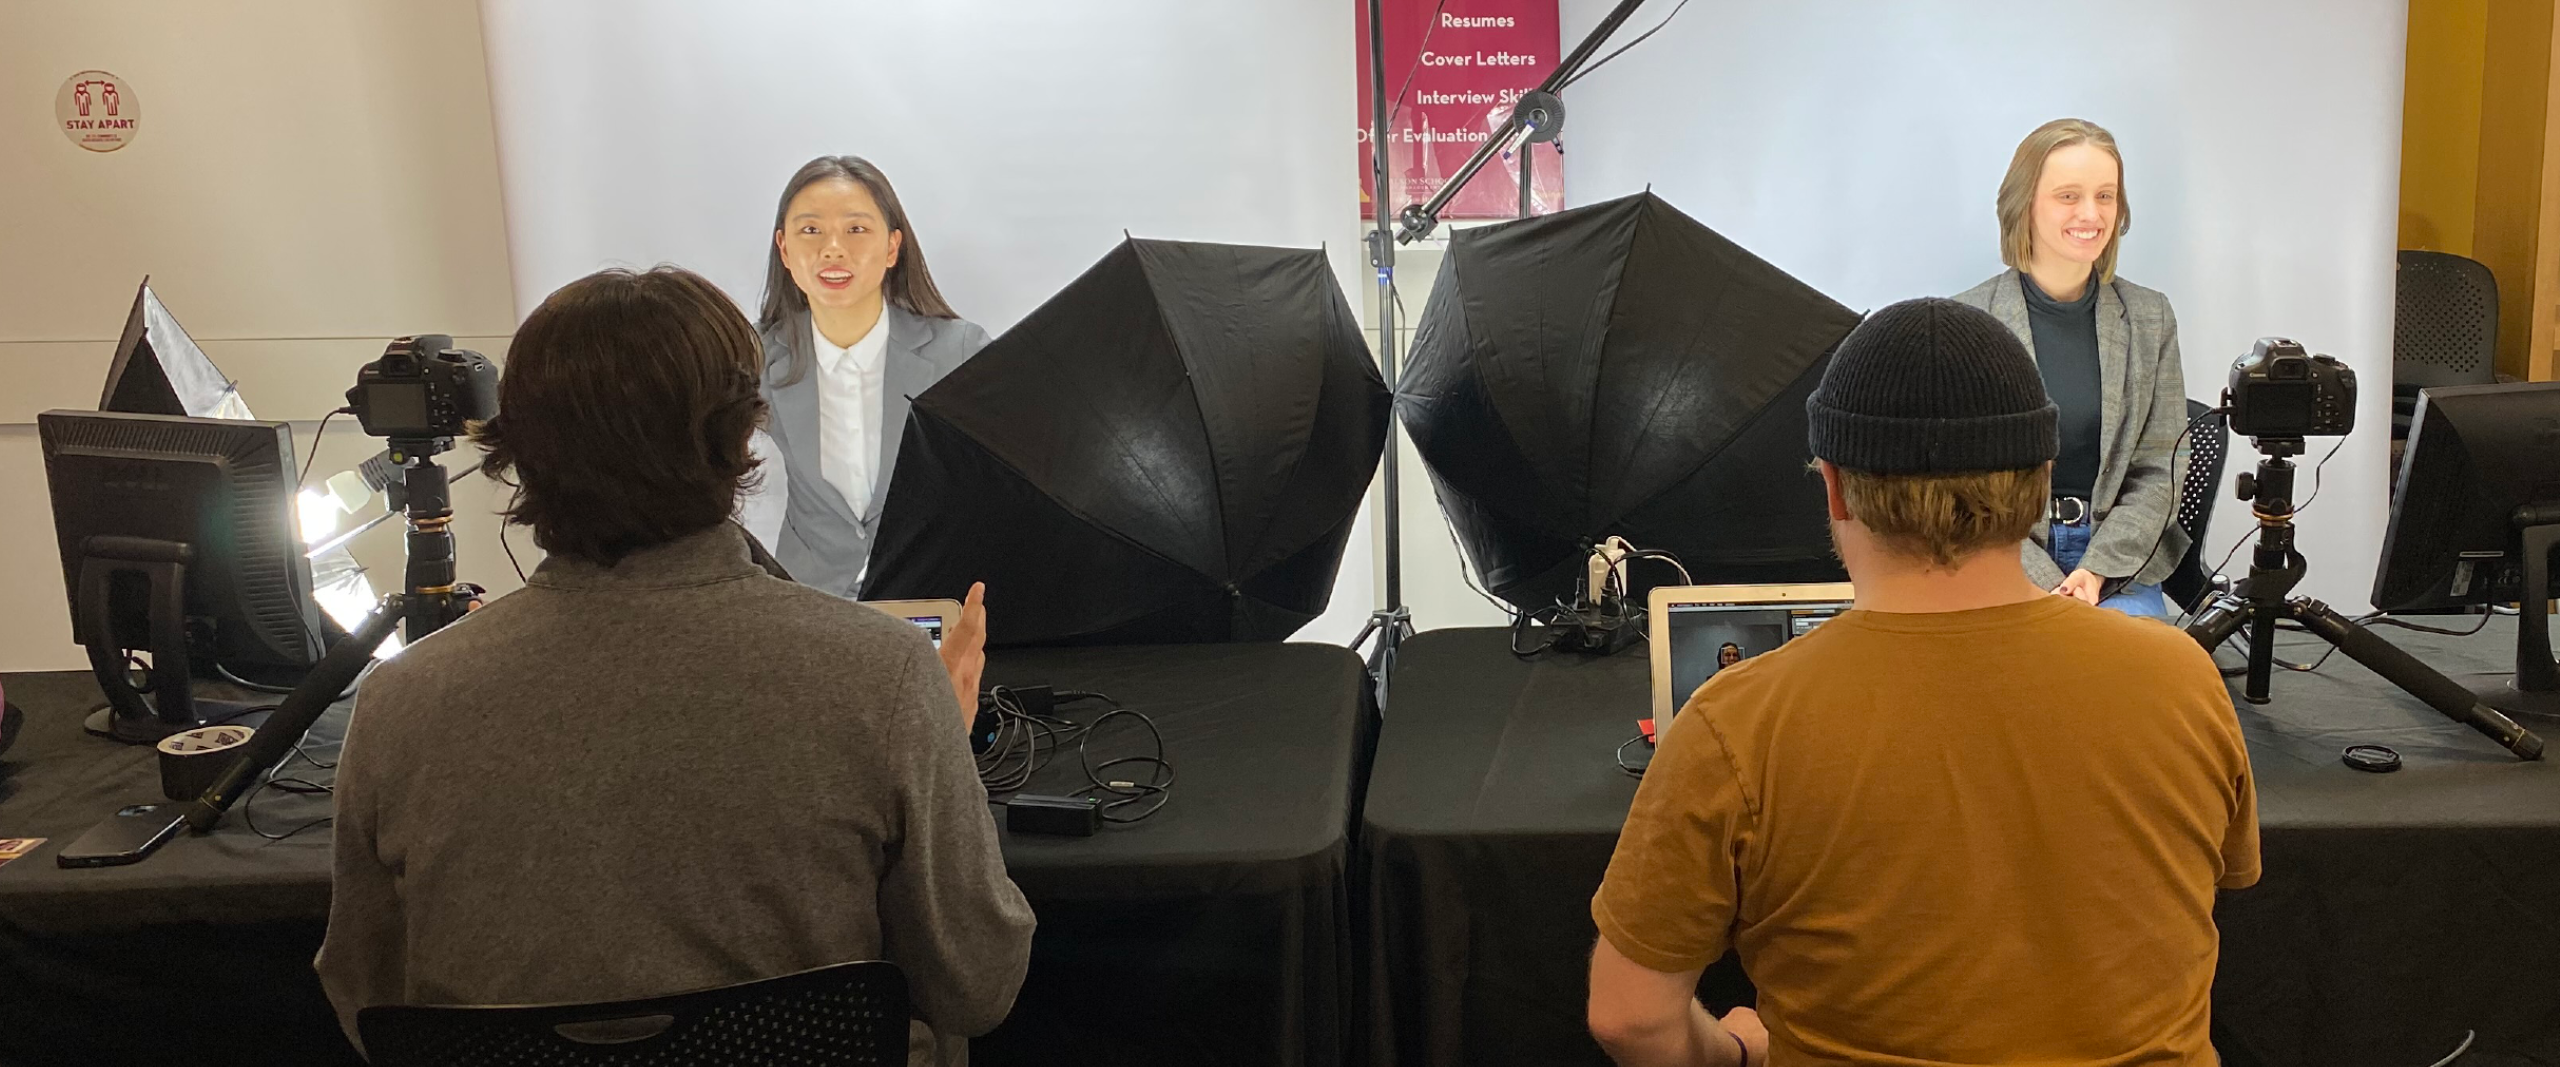 2 students having their headshot taken at an event